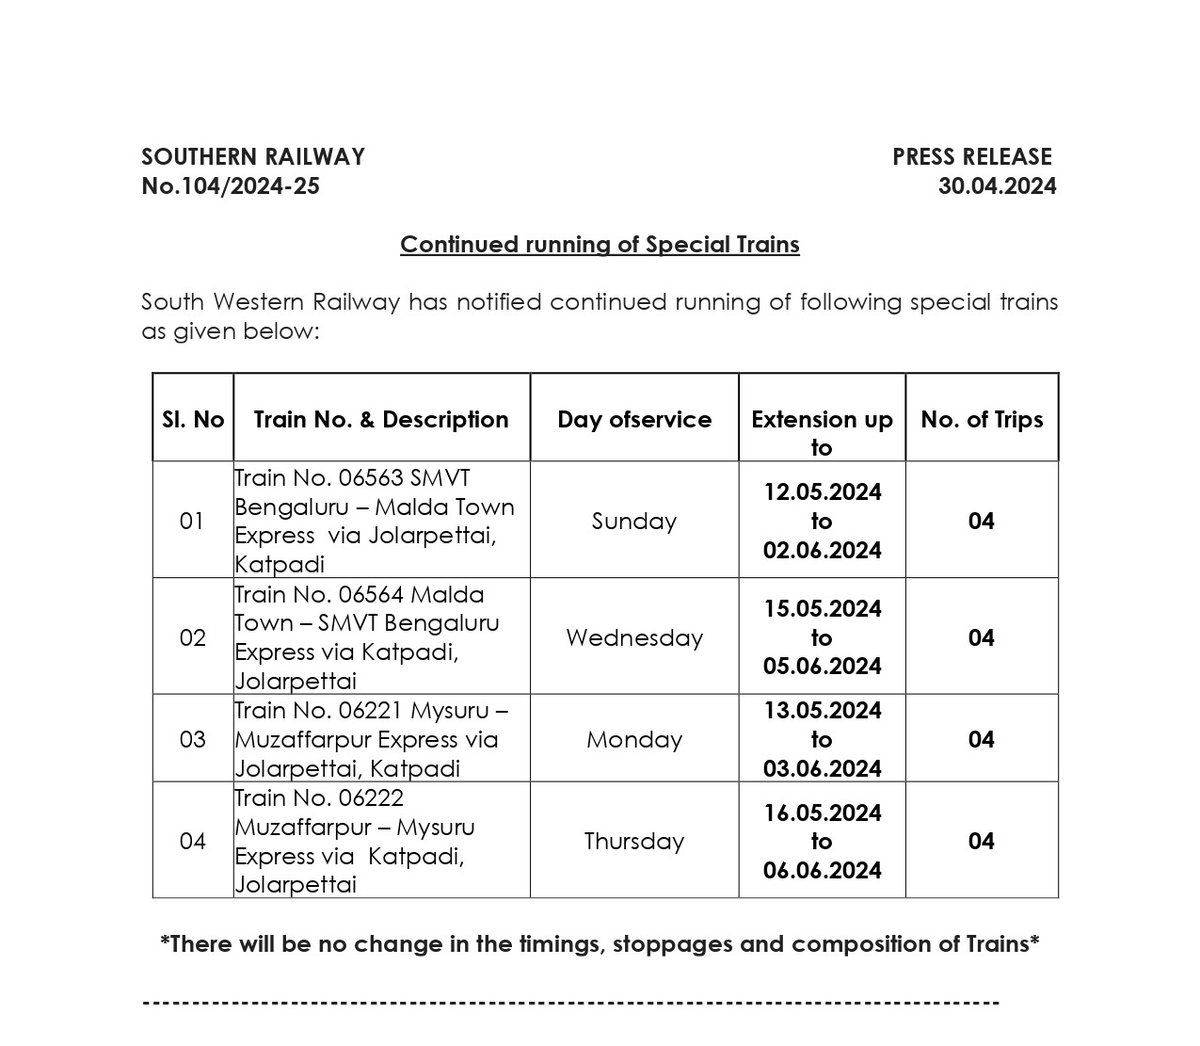 South Western Railway has notified continued running of following special #trains as given below Passengers are requested to take note on this and plan your #travel #SouthernRailway